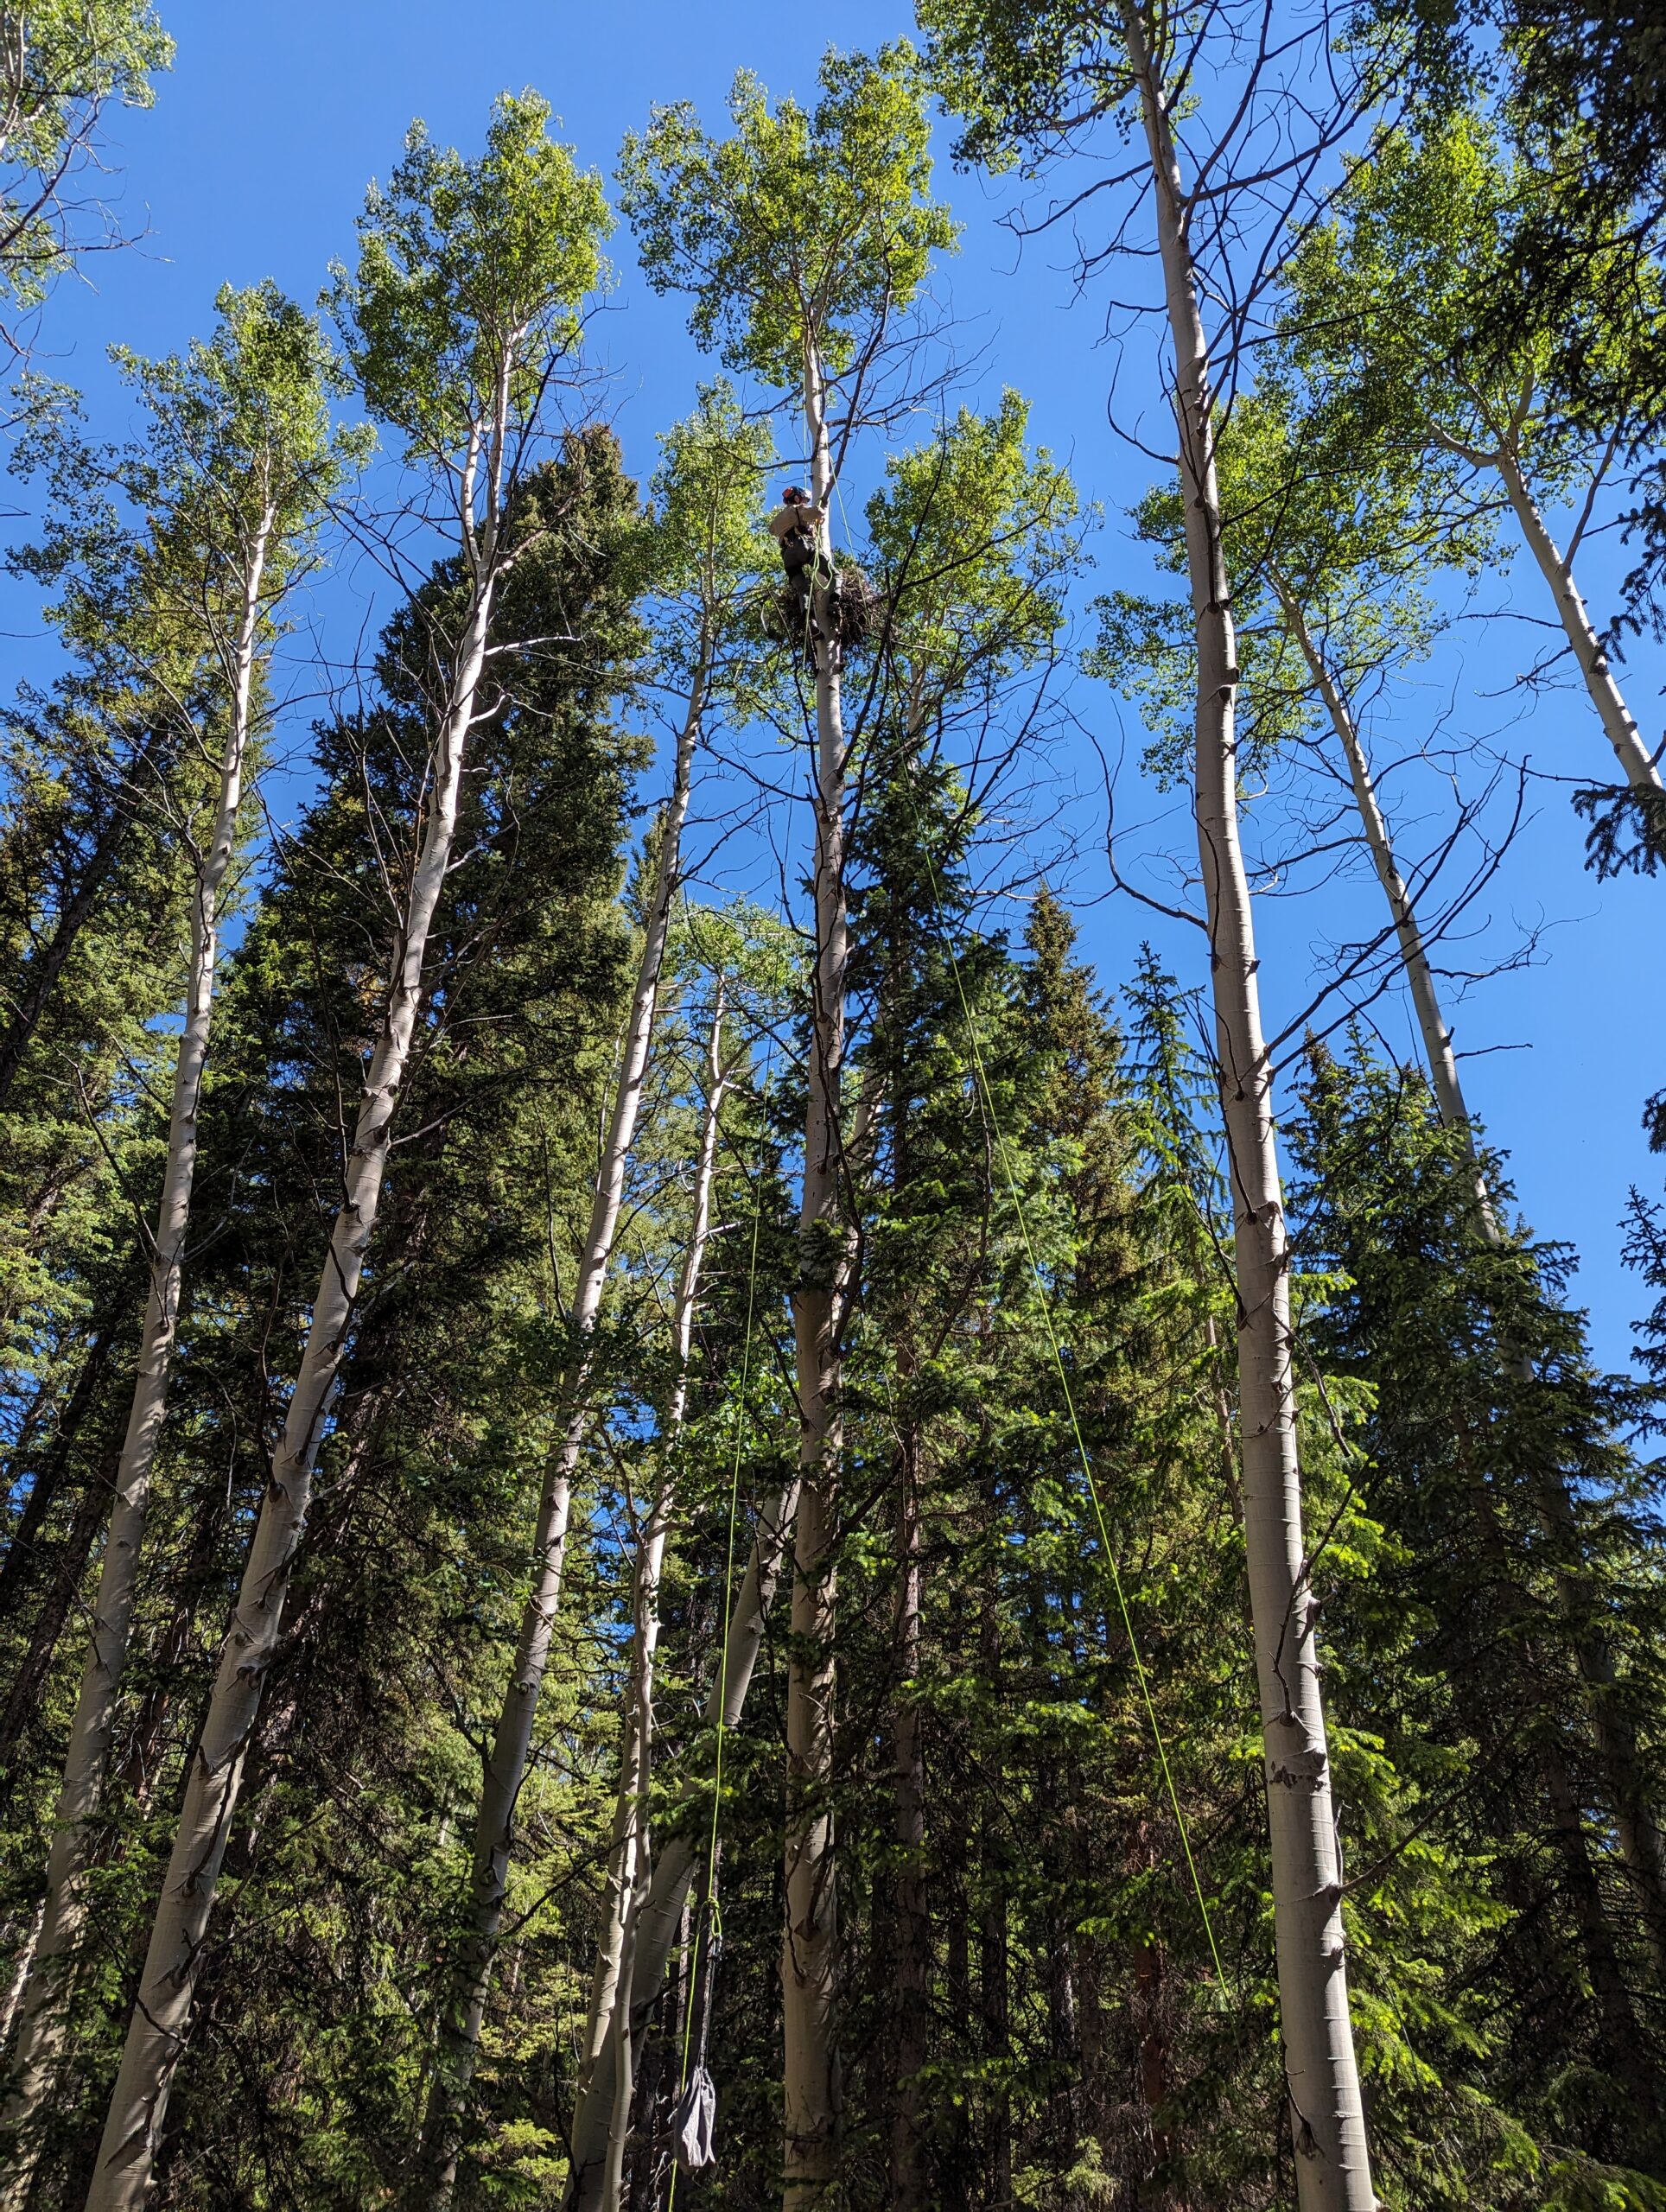 a view from the ground looks up toward the dizzying height at the top of some very tall and sparsely branched conifer trees. the biologist wearing helmet and climbing gear looks tiny at the top of the tree!